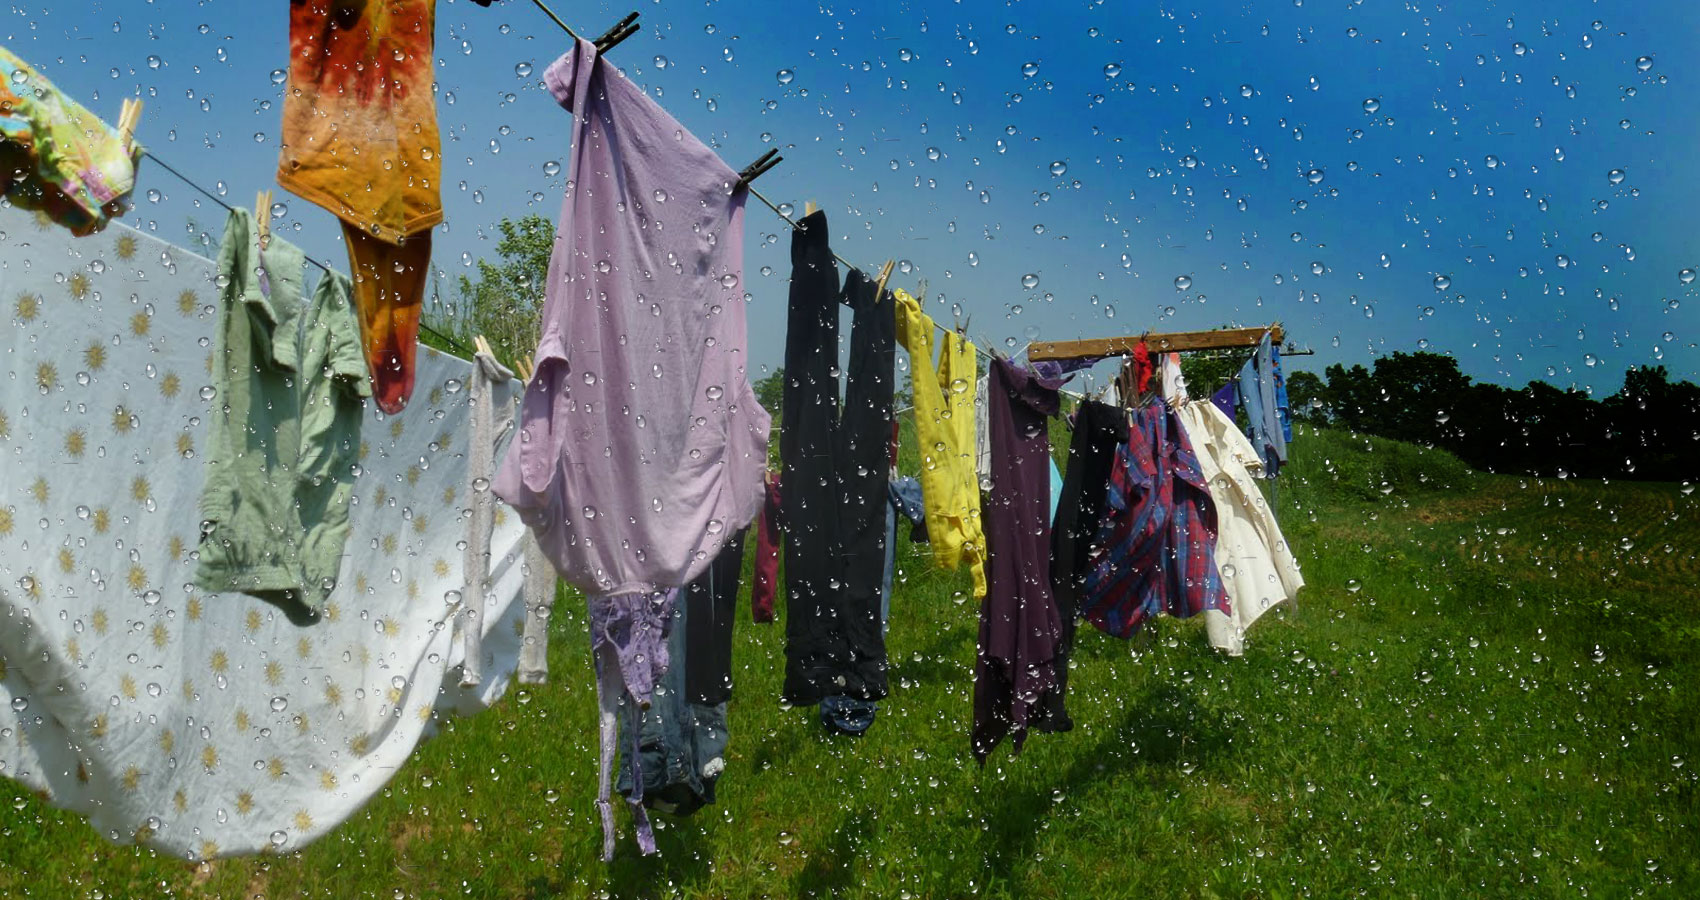 The Washing by Barbara Turney Wieland at Spillwords.com